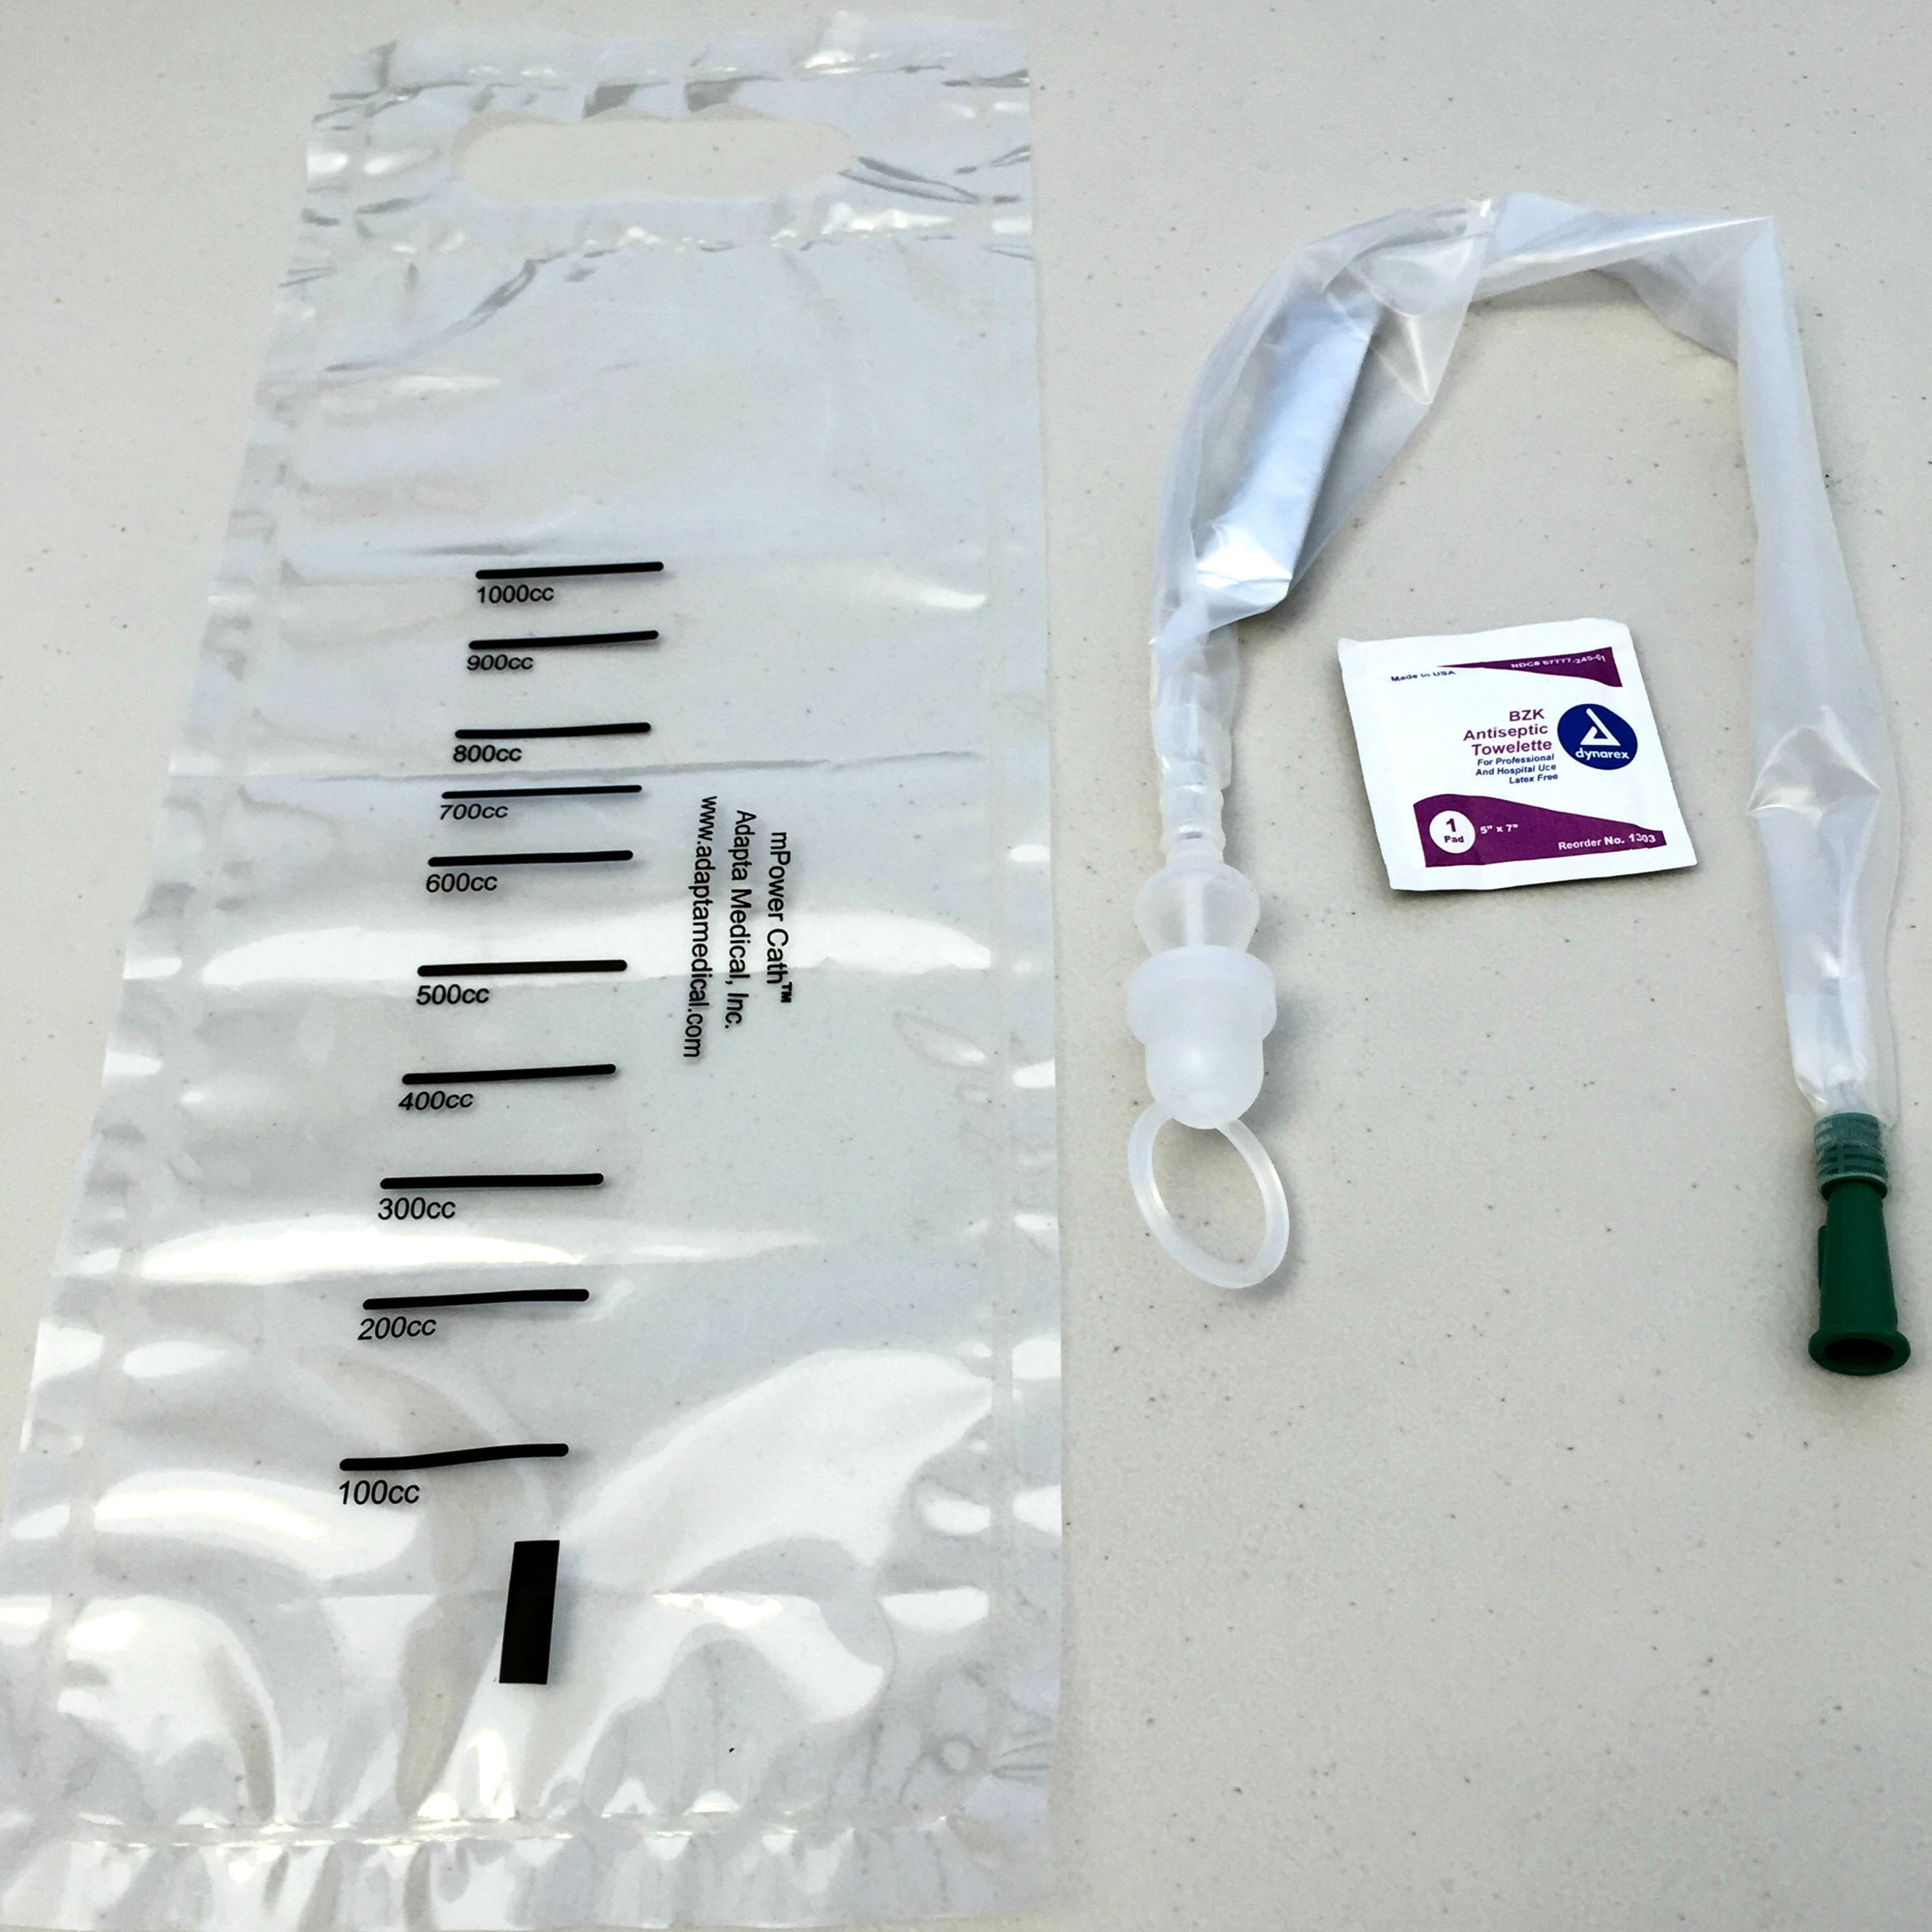 Adapta Medical's new mPower Hydro-S intermittent urinary catheter system, complete with collection bag.